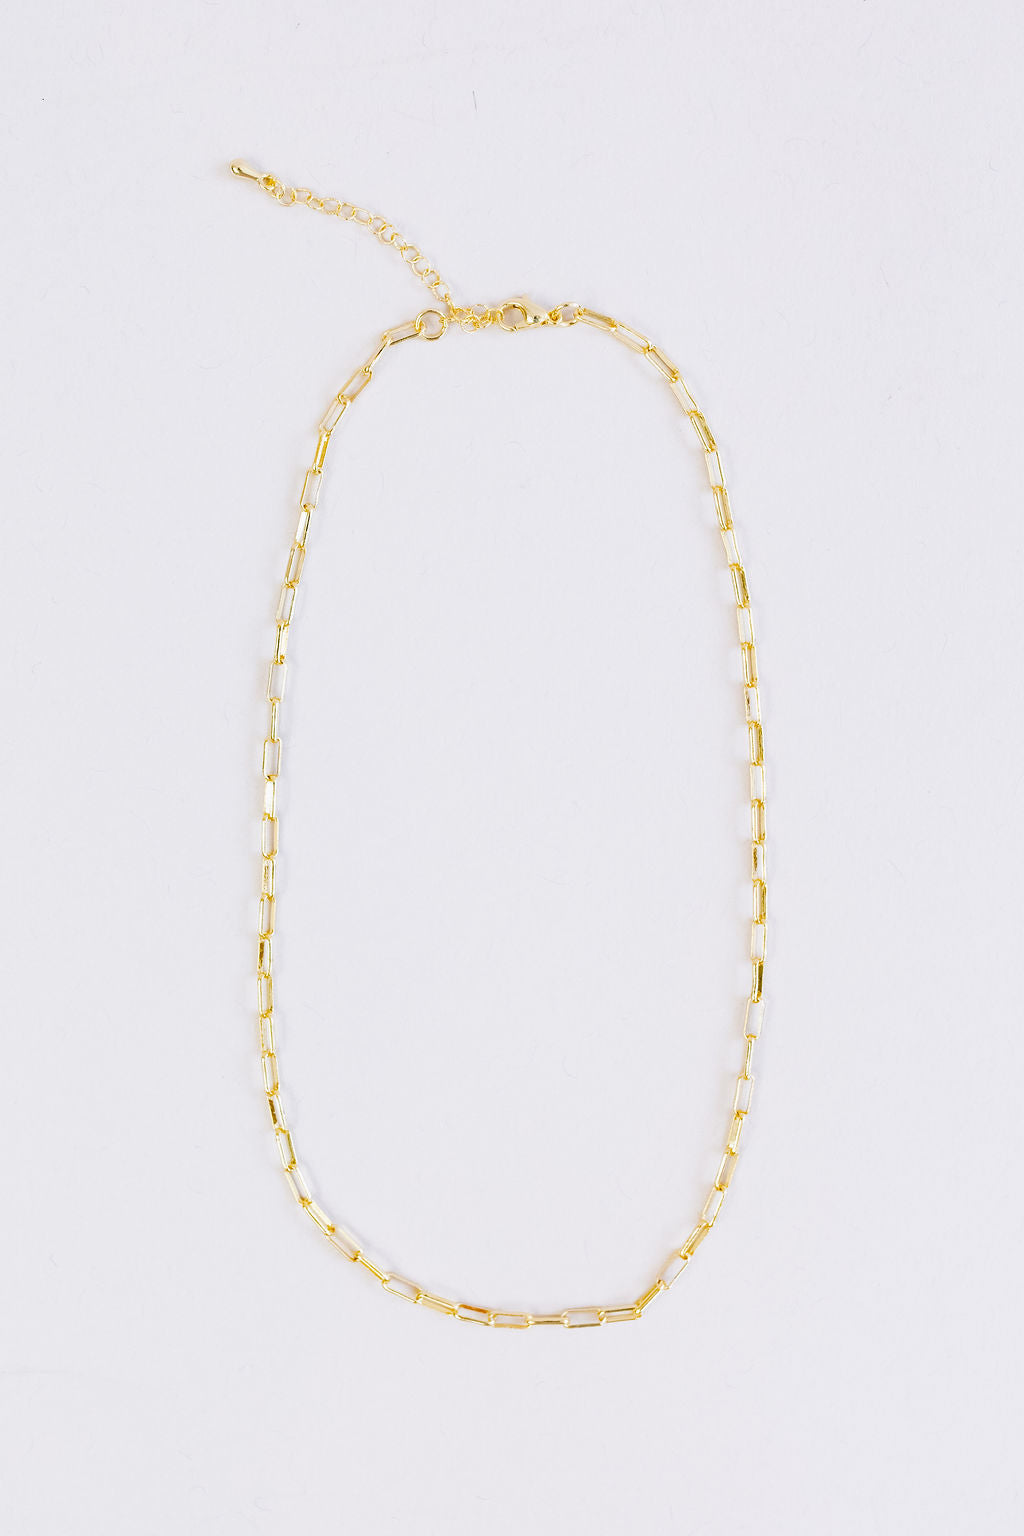 Parker Rounded Paperclip Chain Necklace - Poppy and Stella